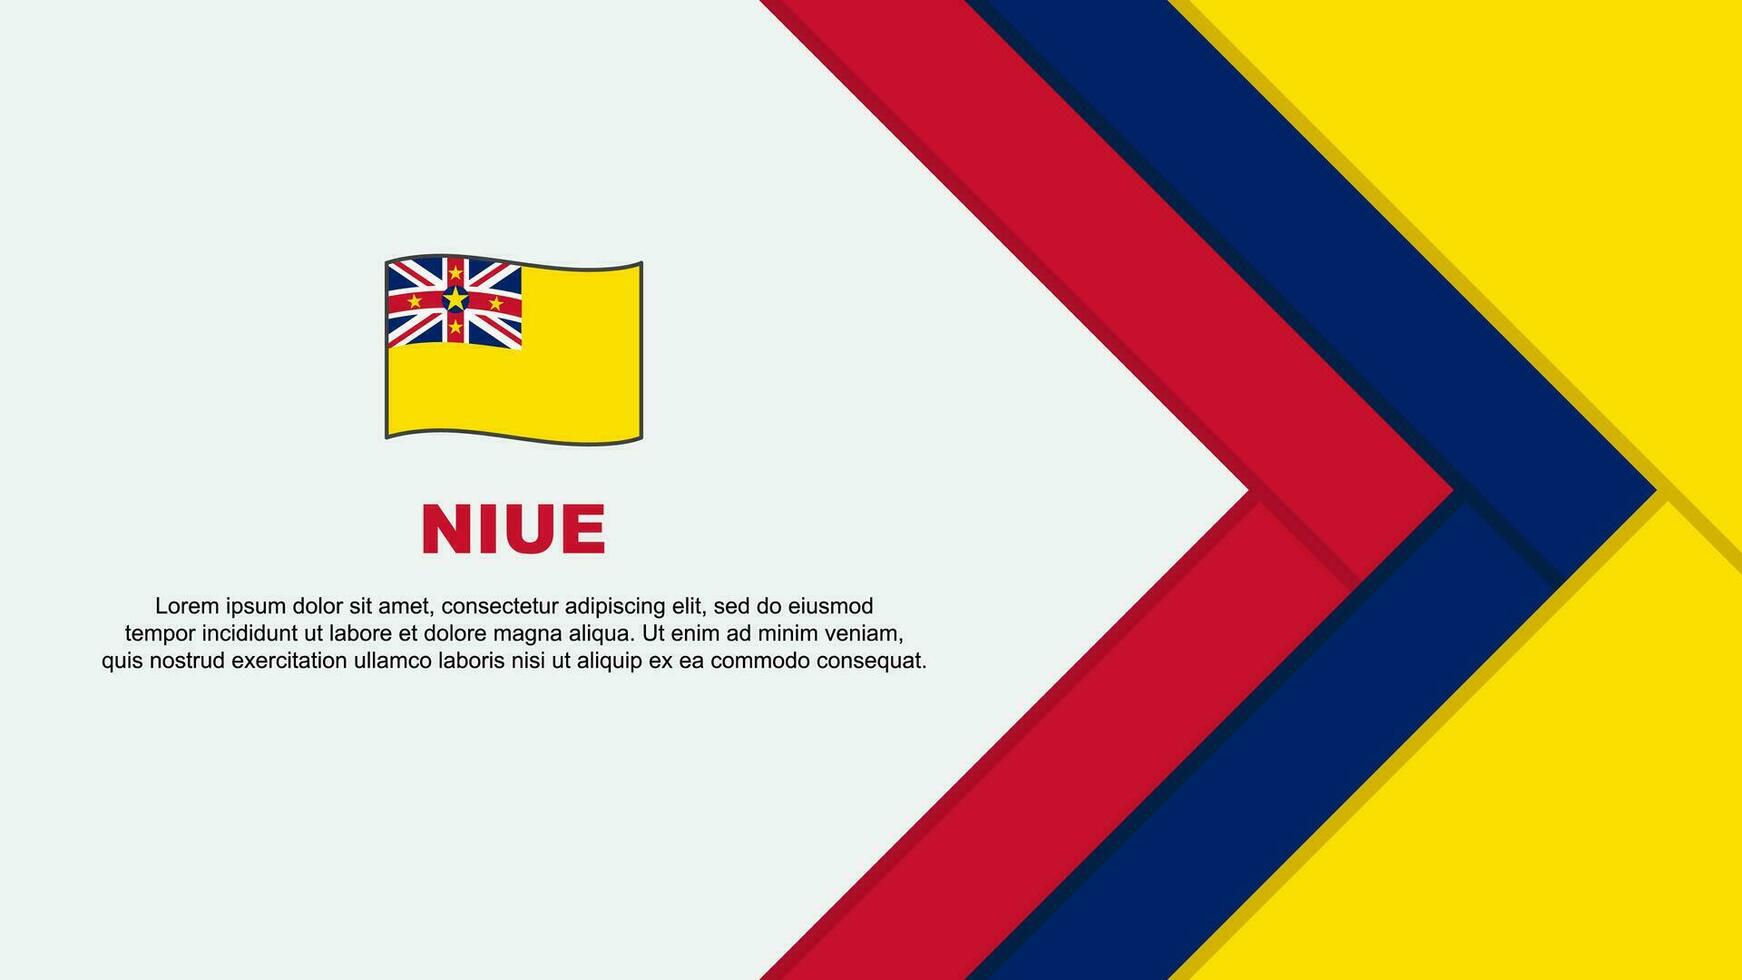 Niue Flag Abstract Background Design Template. Niue Independence Day Banner Cartoon Vector Illustration. Niue Cartoon